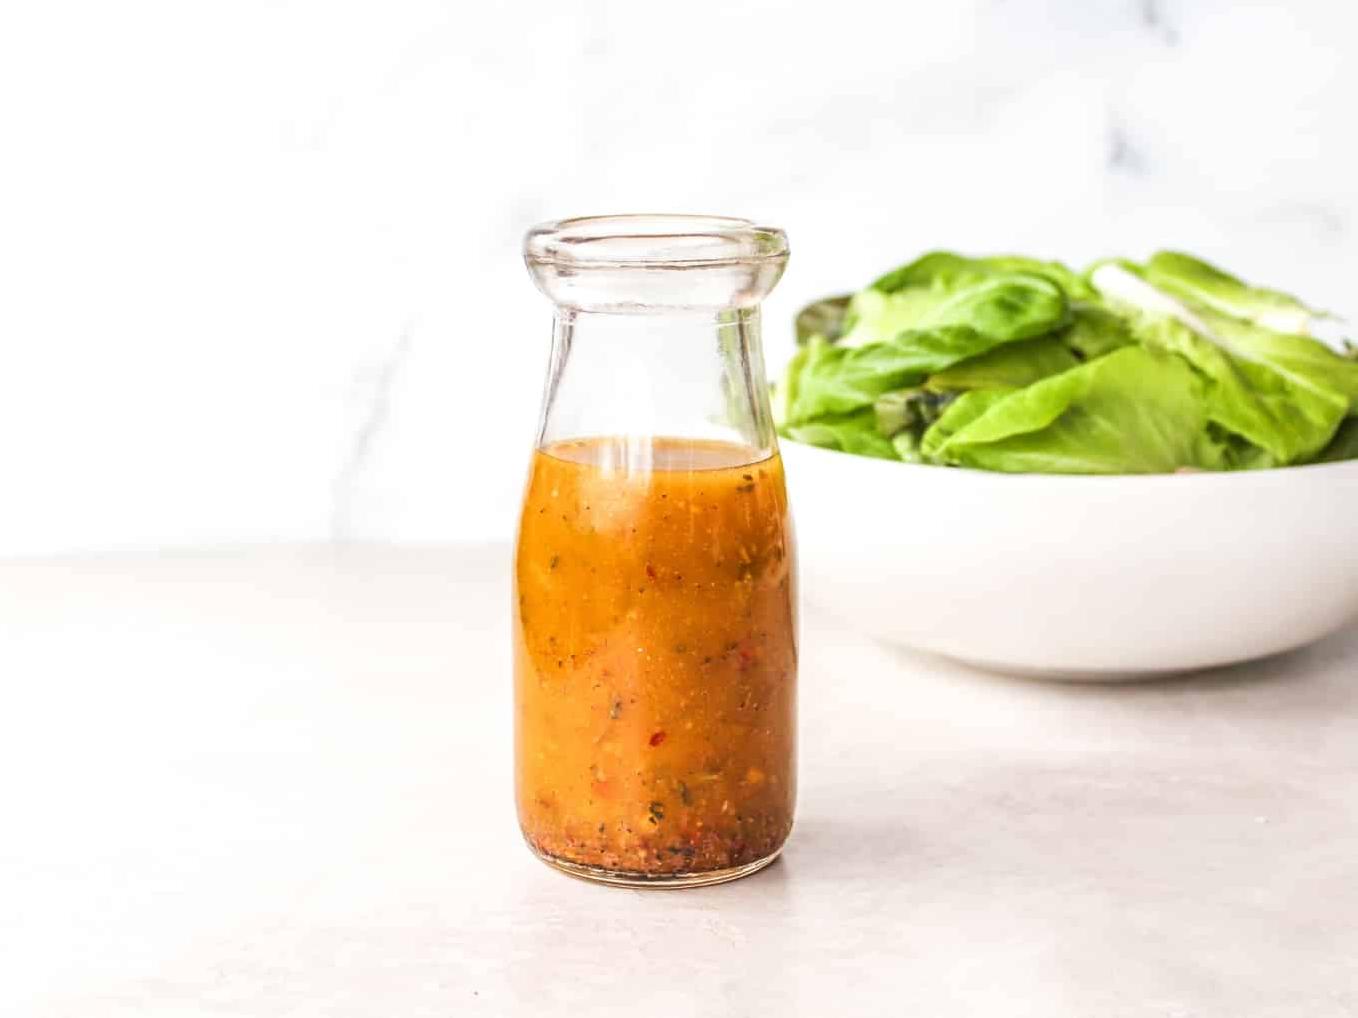  Whisk your taste buds away to Italy with this homemade salad dressing